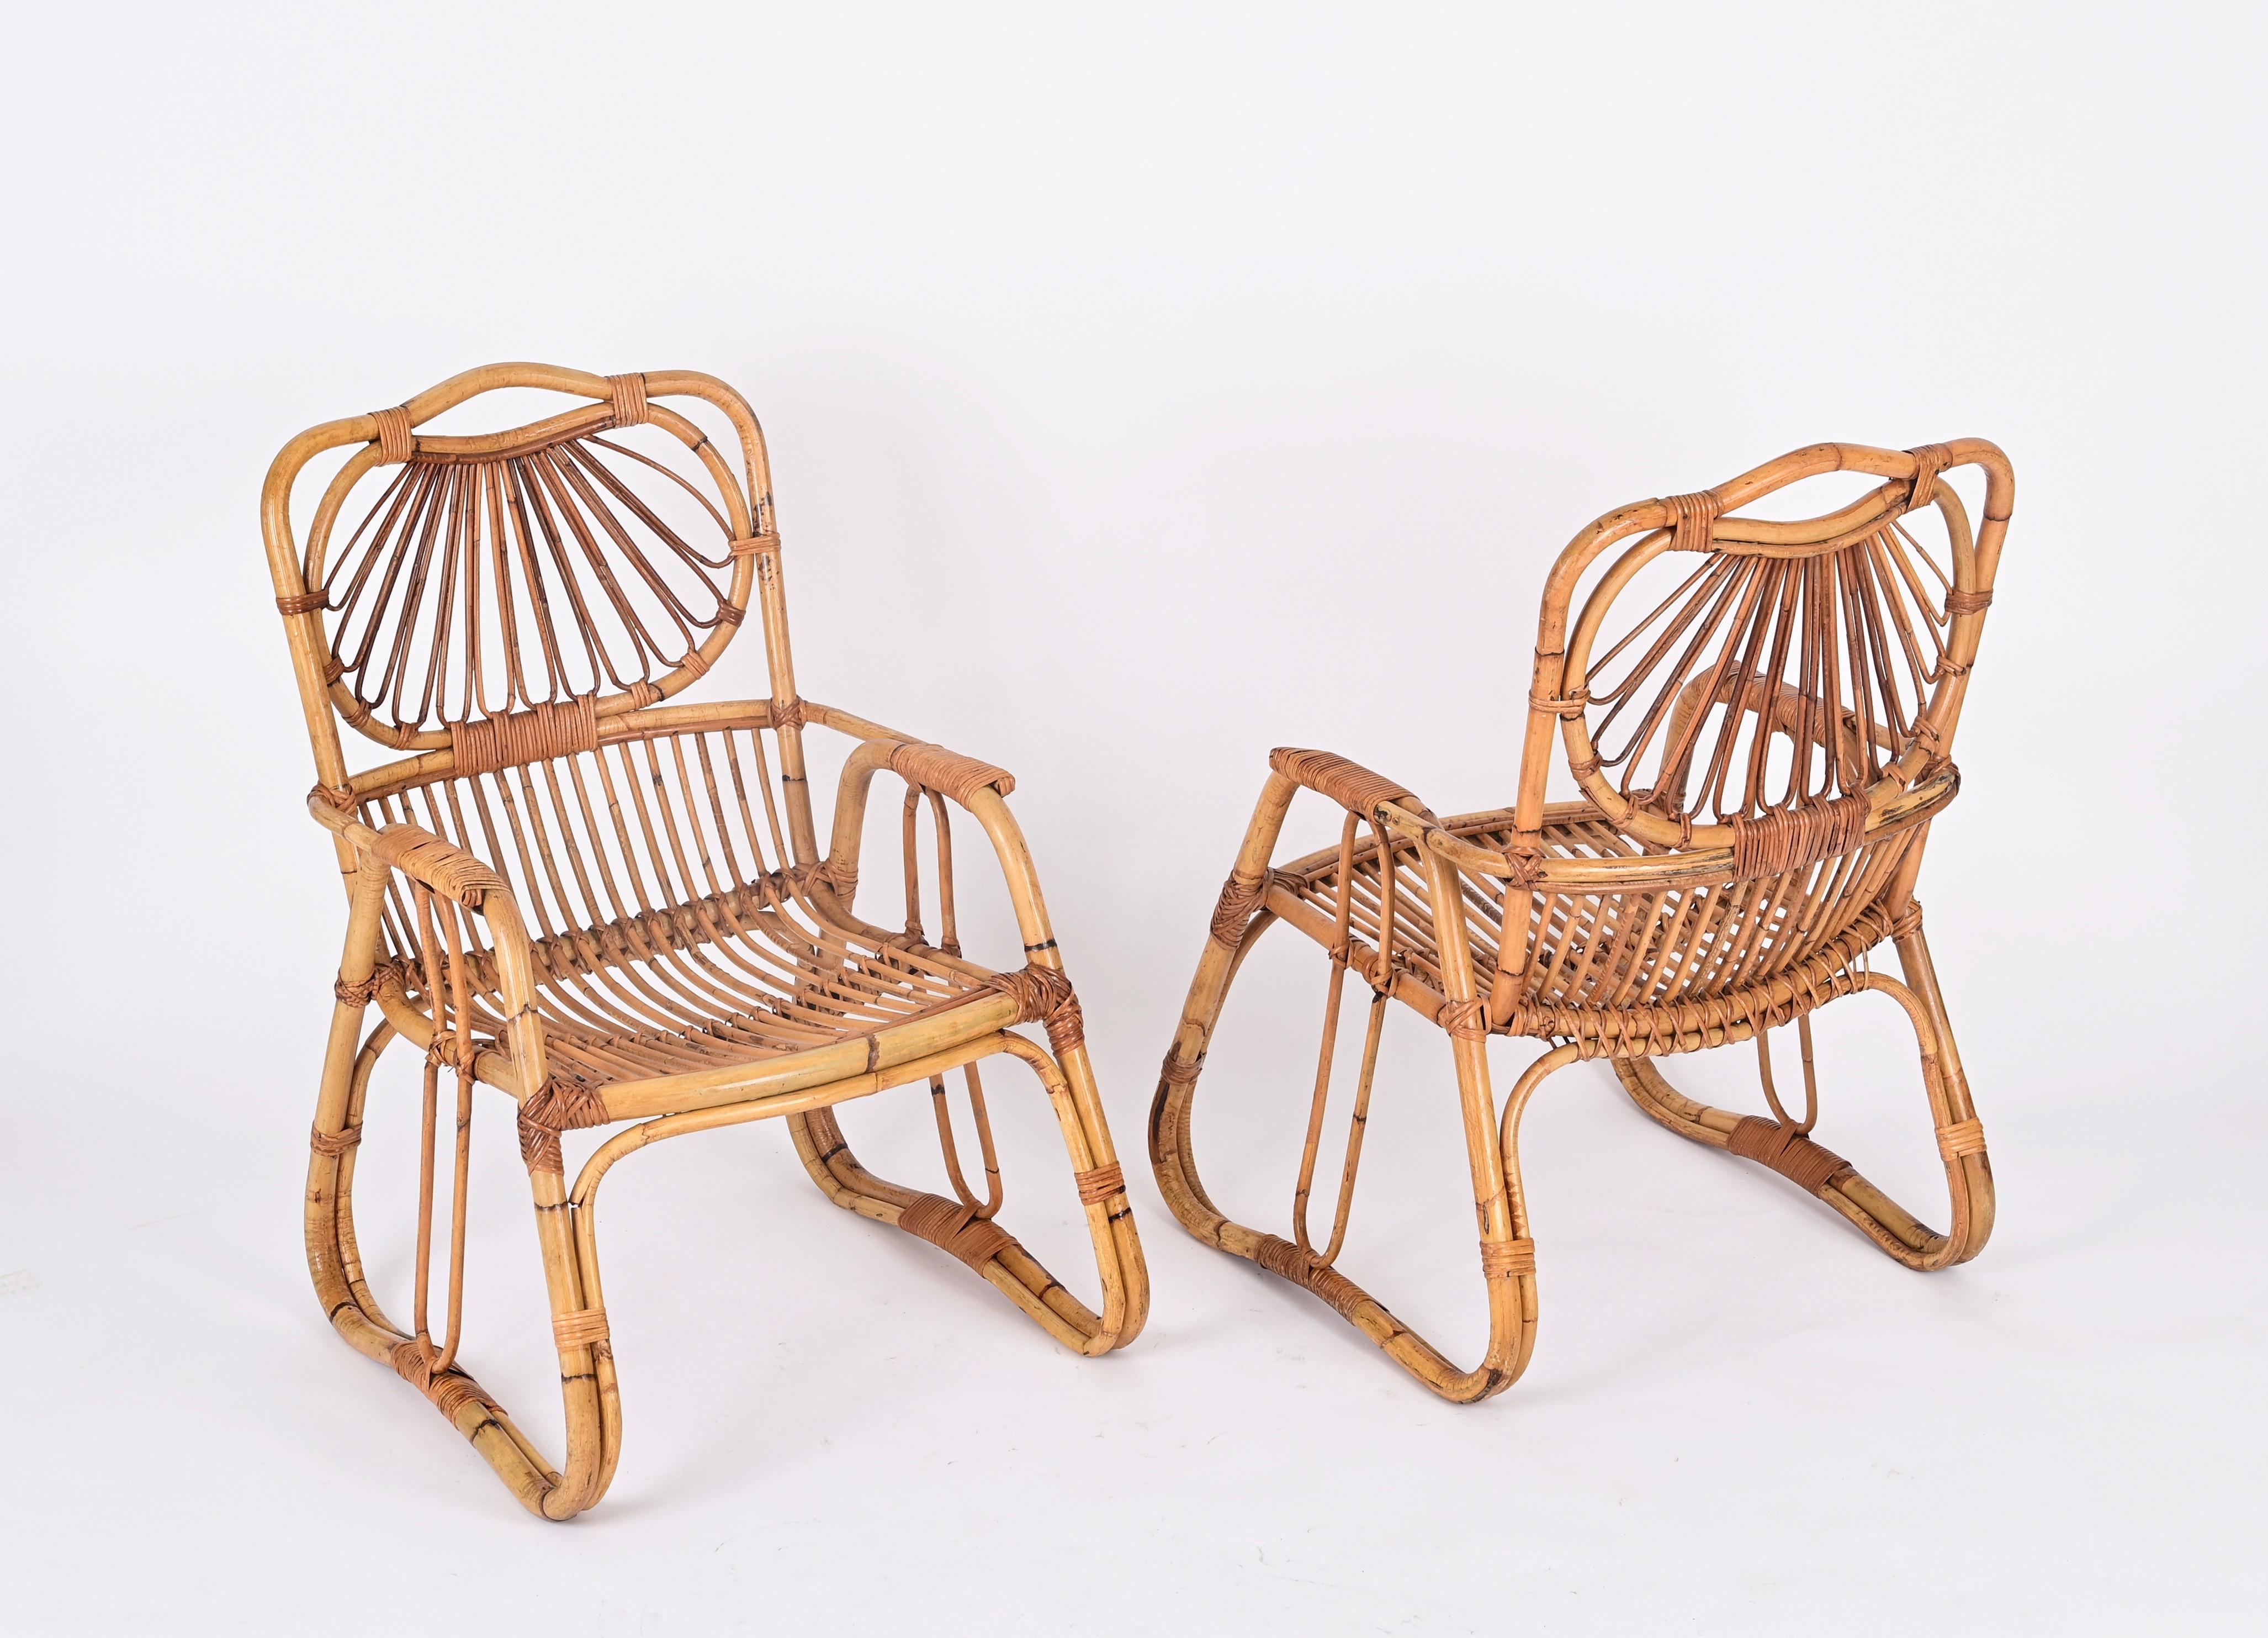 Stunning pair of Mid-Century Italian armchairs made in a beautiful combination of curved rattan and hand-woven wicker. This charming French Riviera style armchairs are attributed to Giovanni Travasa and were made in Italy during the 1960s.  

Fully